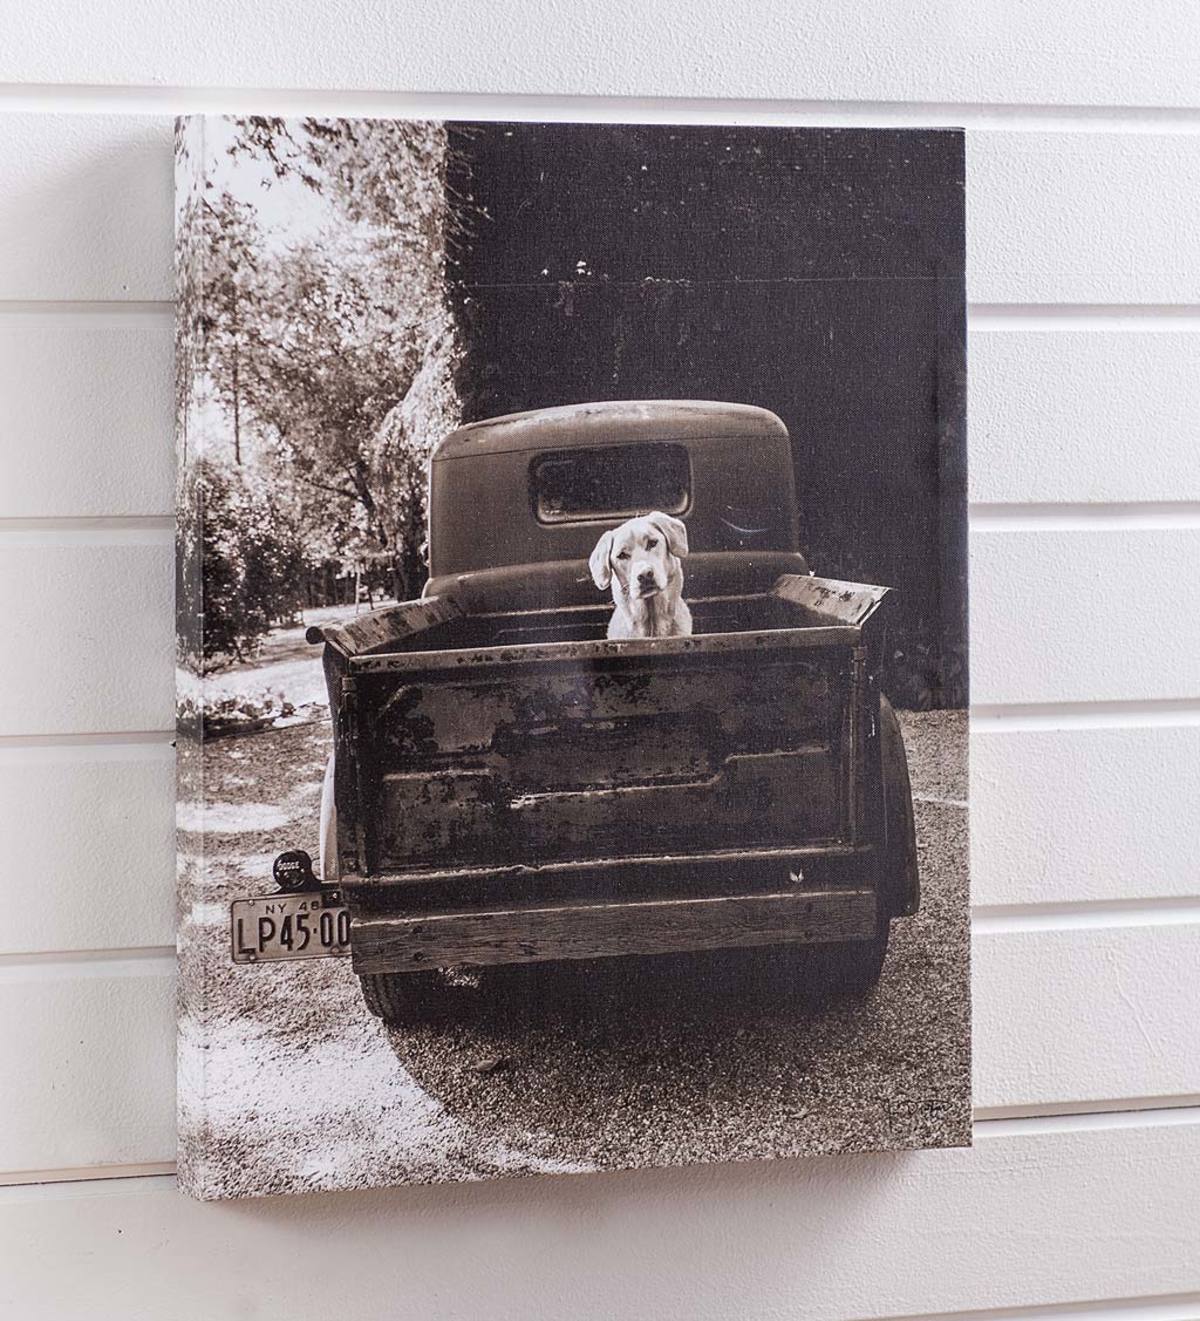 'Get Out Of Dodge' Dog in Truck Canvas Wall Art